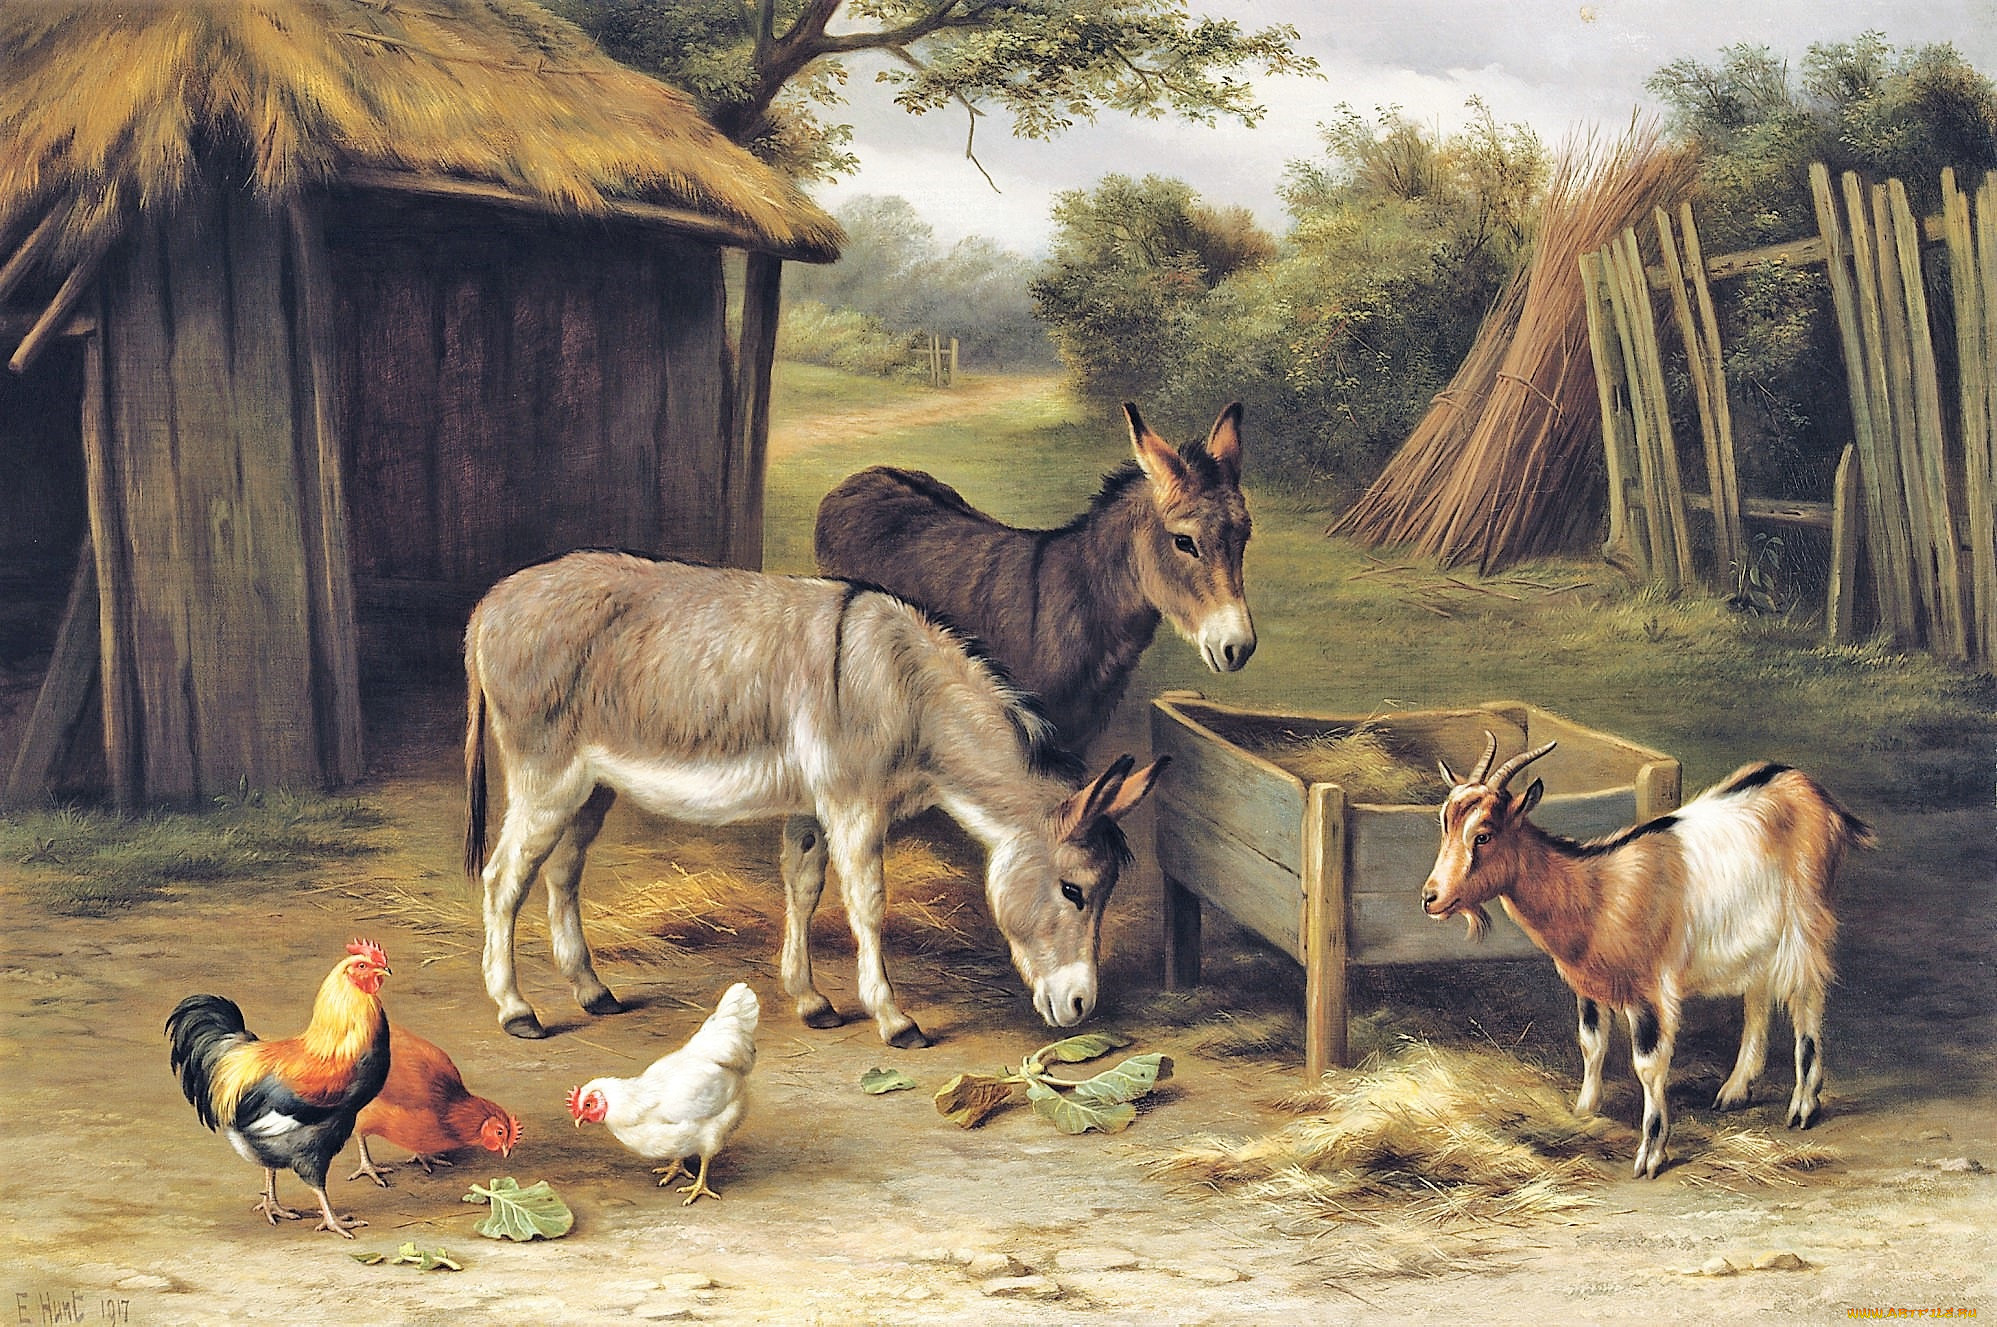 Artwork Painting Animals Goats Donkey Chickens 1997x1327